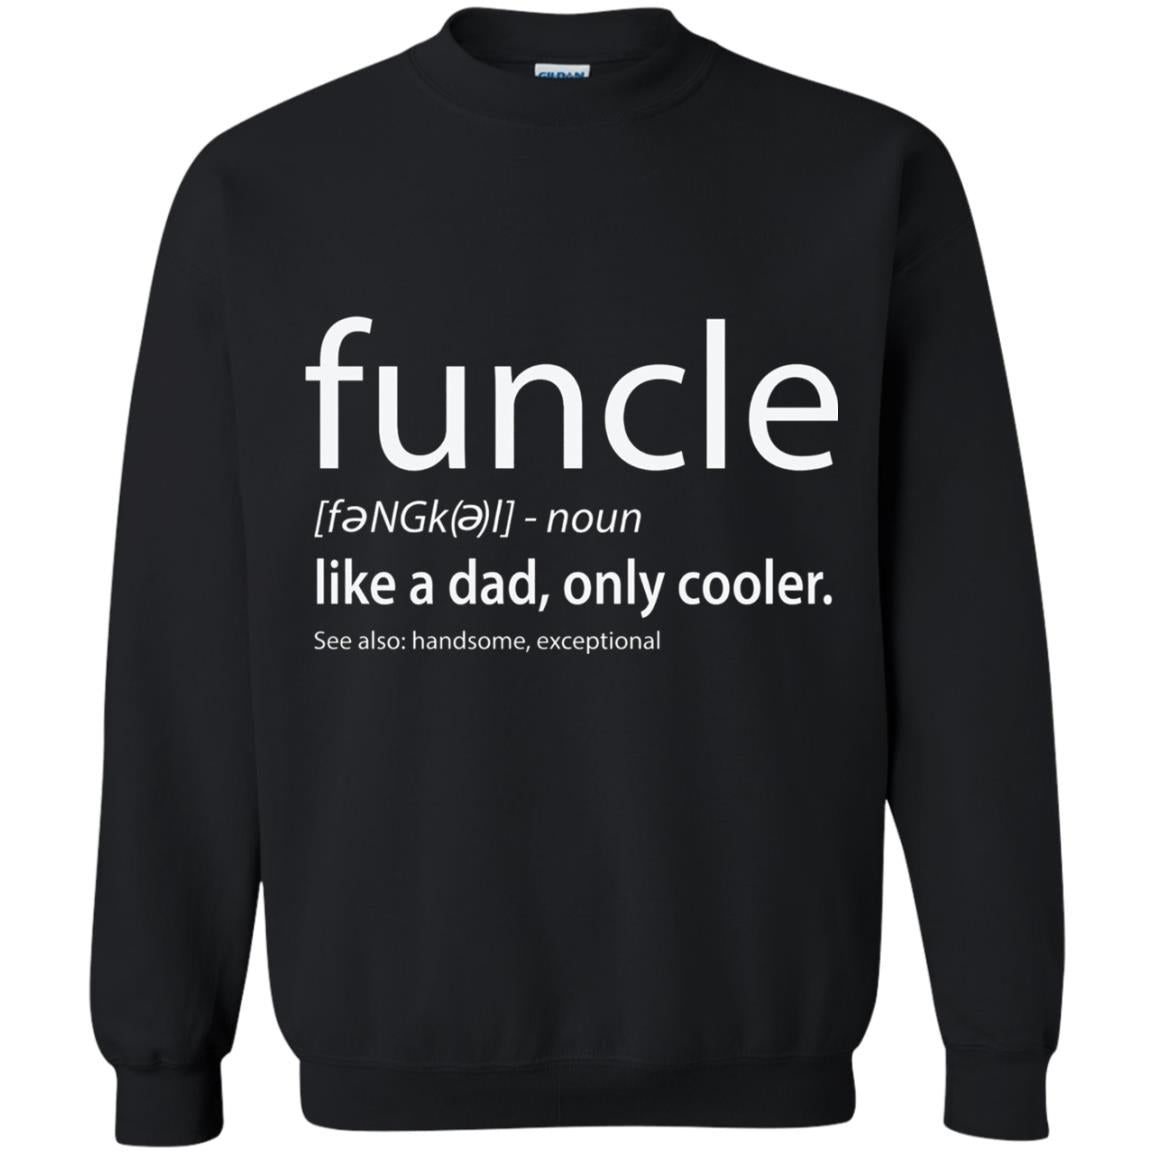 Funcle Definition T-shirt Like Dad But Cooler